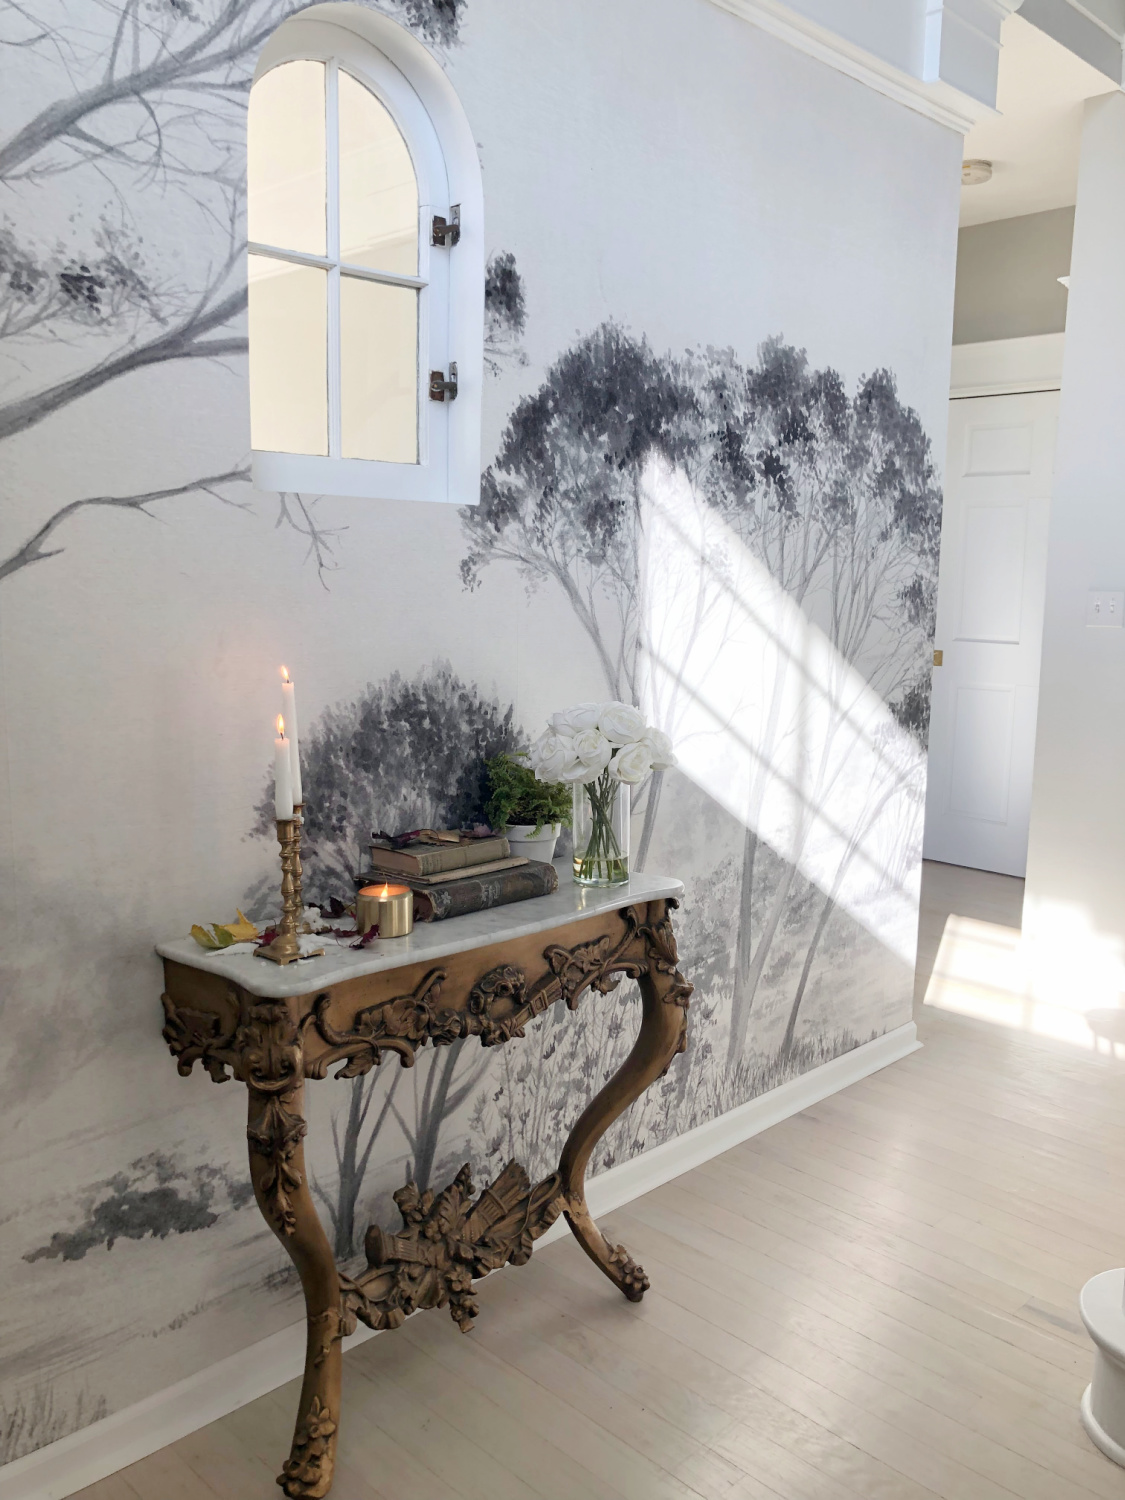 Hello Lovely's entry wallpaper mural with trees (Photowall) and French console with fall decor. #modernfrench #frenchconsole #treemural #grisaillemural